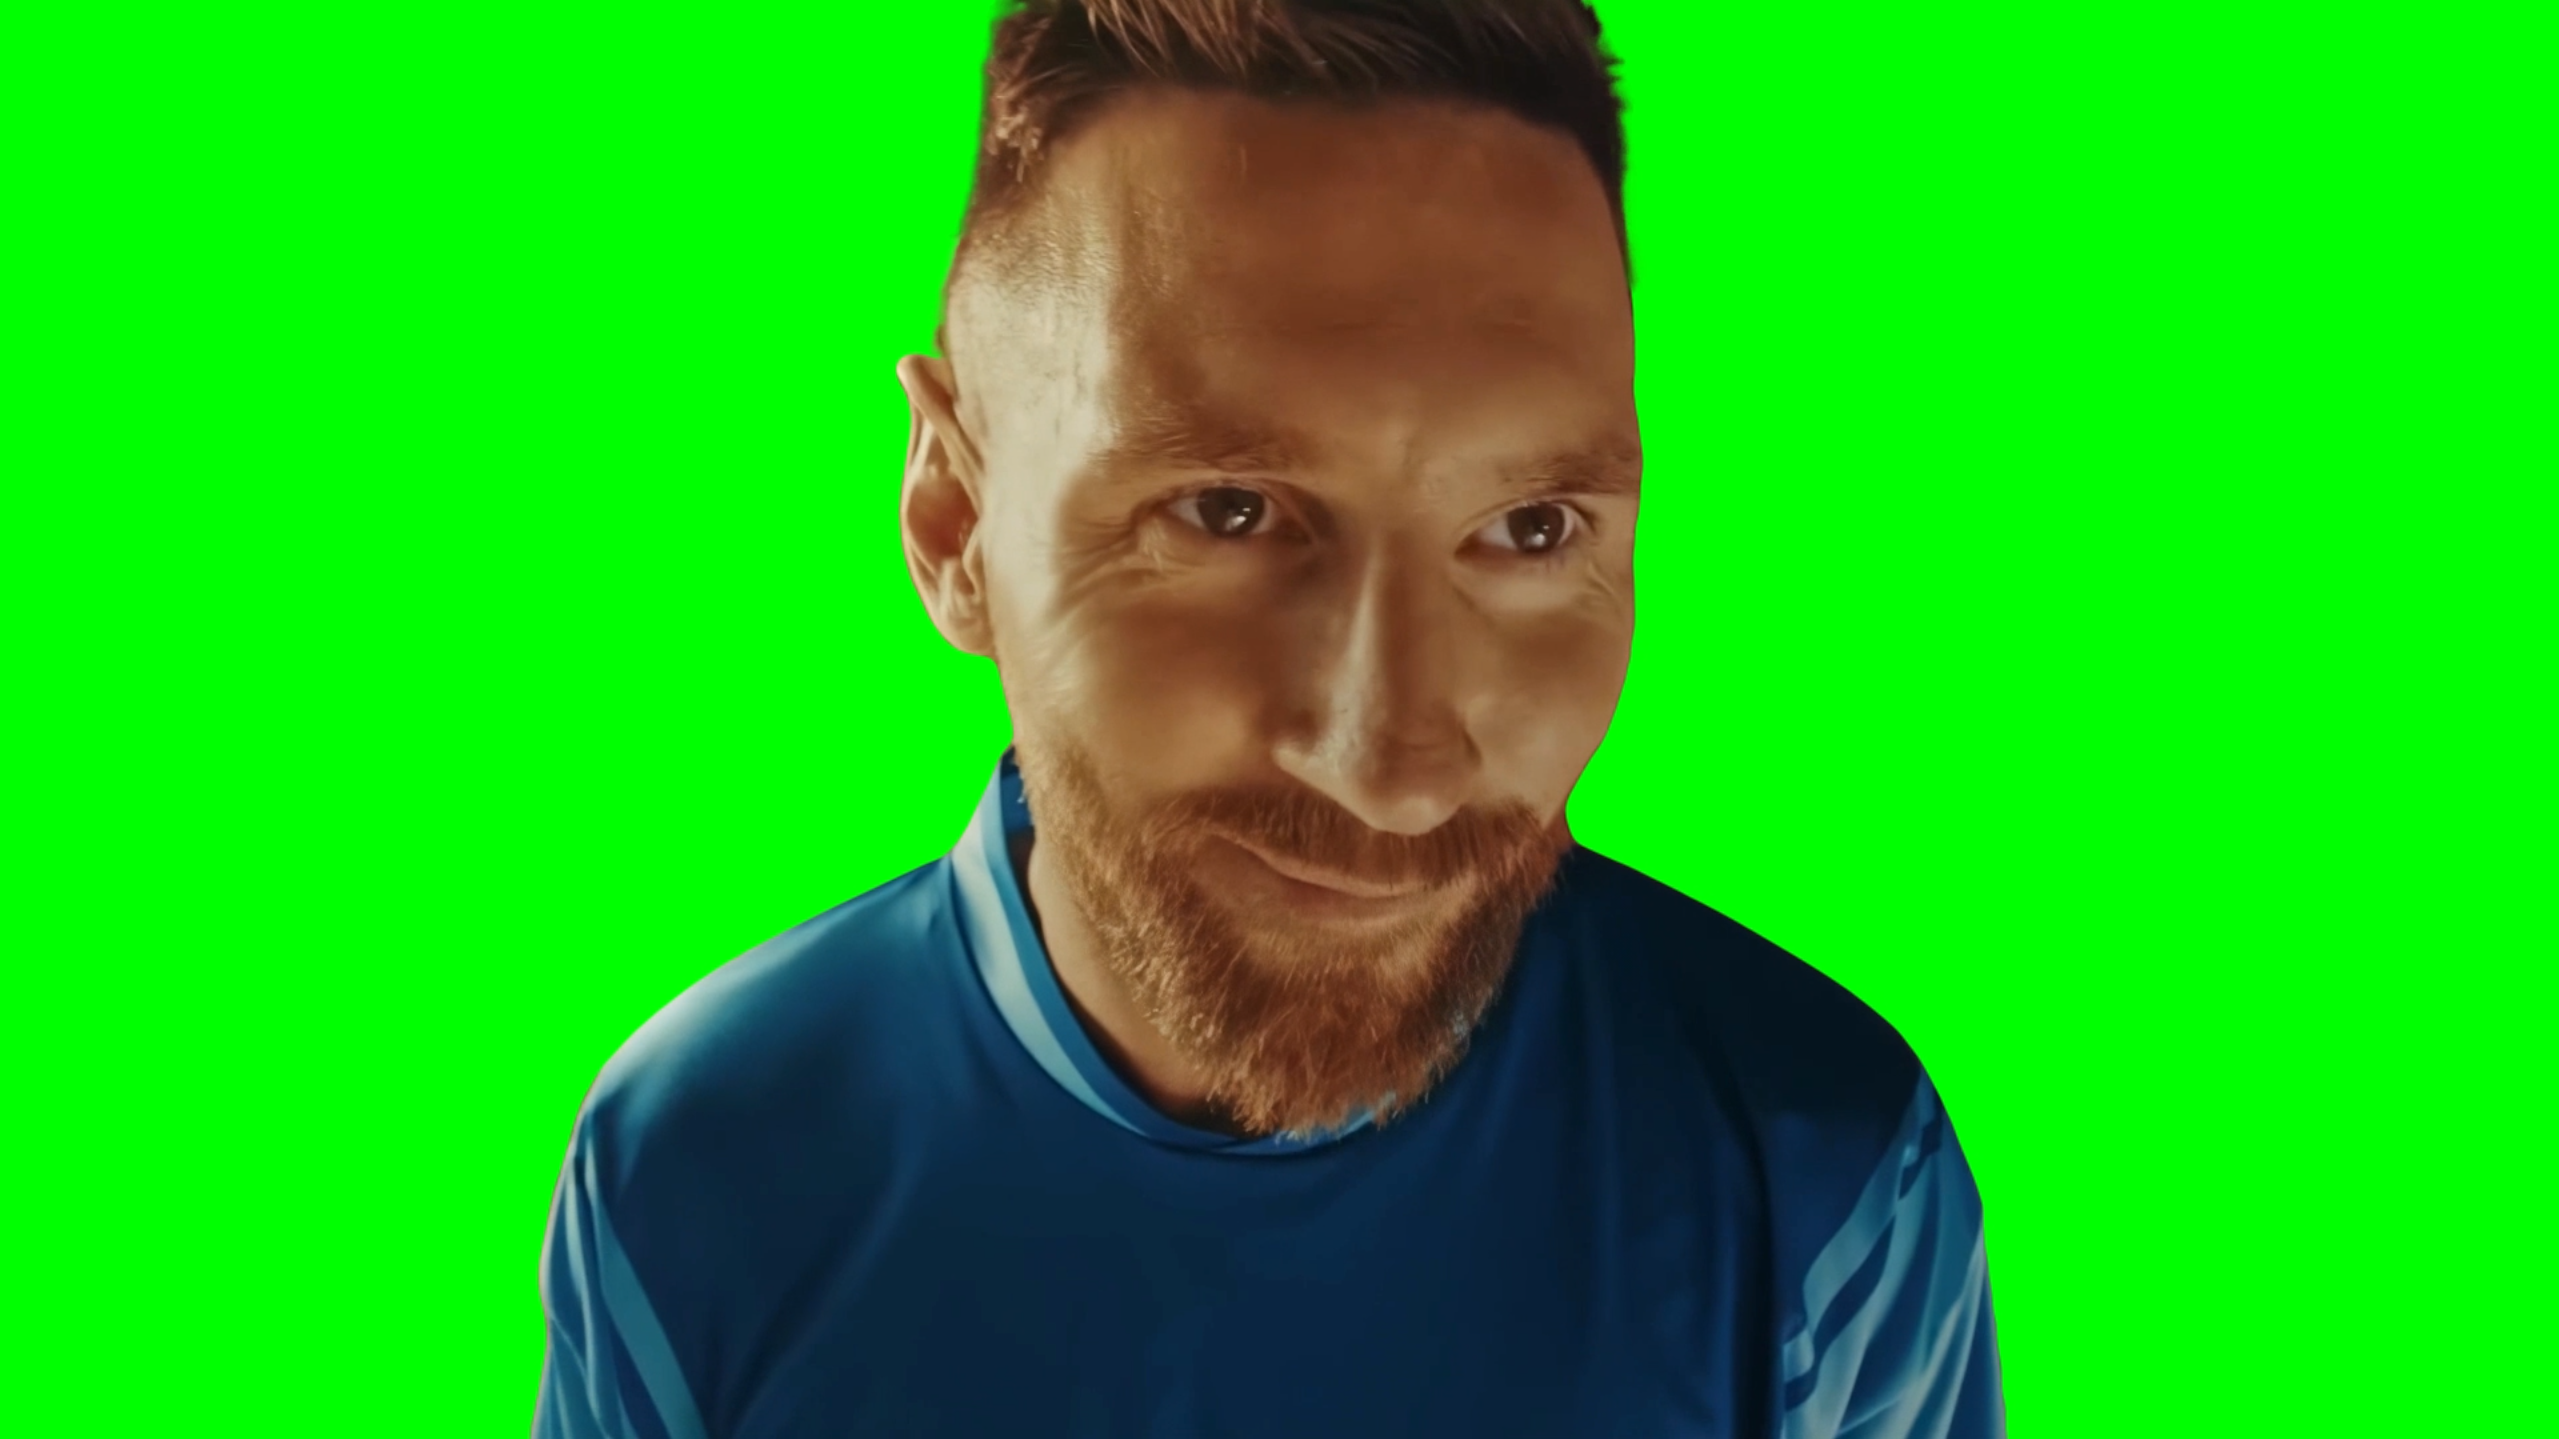 Messi doing a funny face then running - Messi Pepsi Commercial (Green Screen)